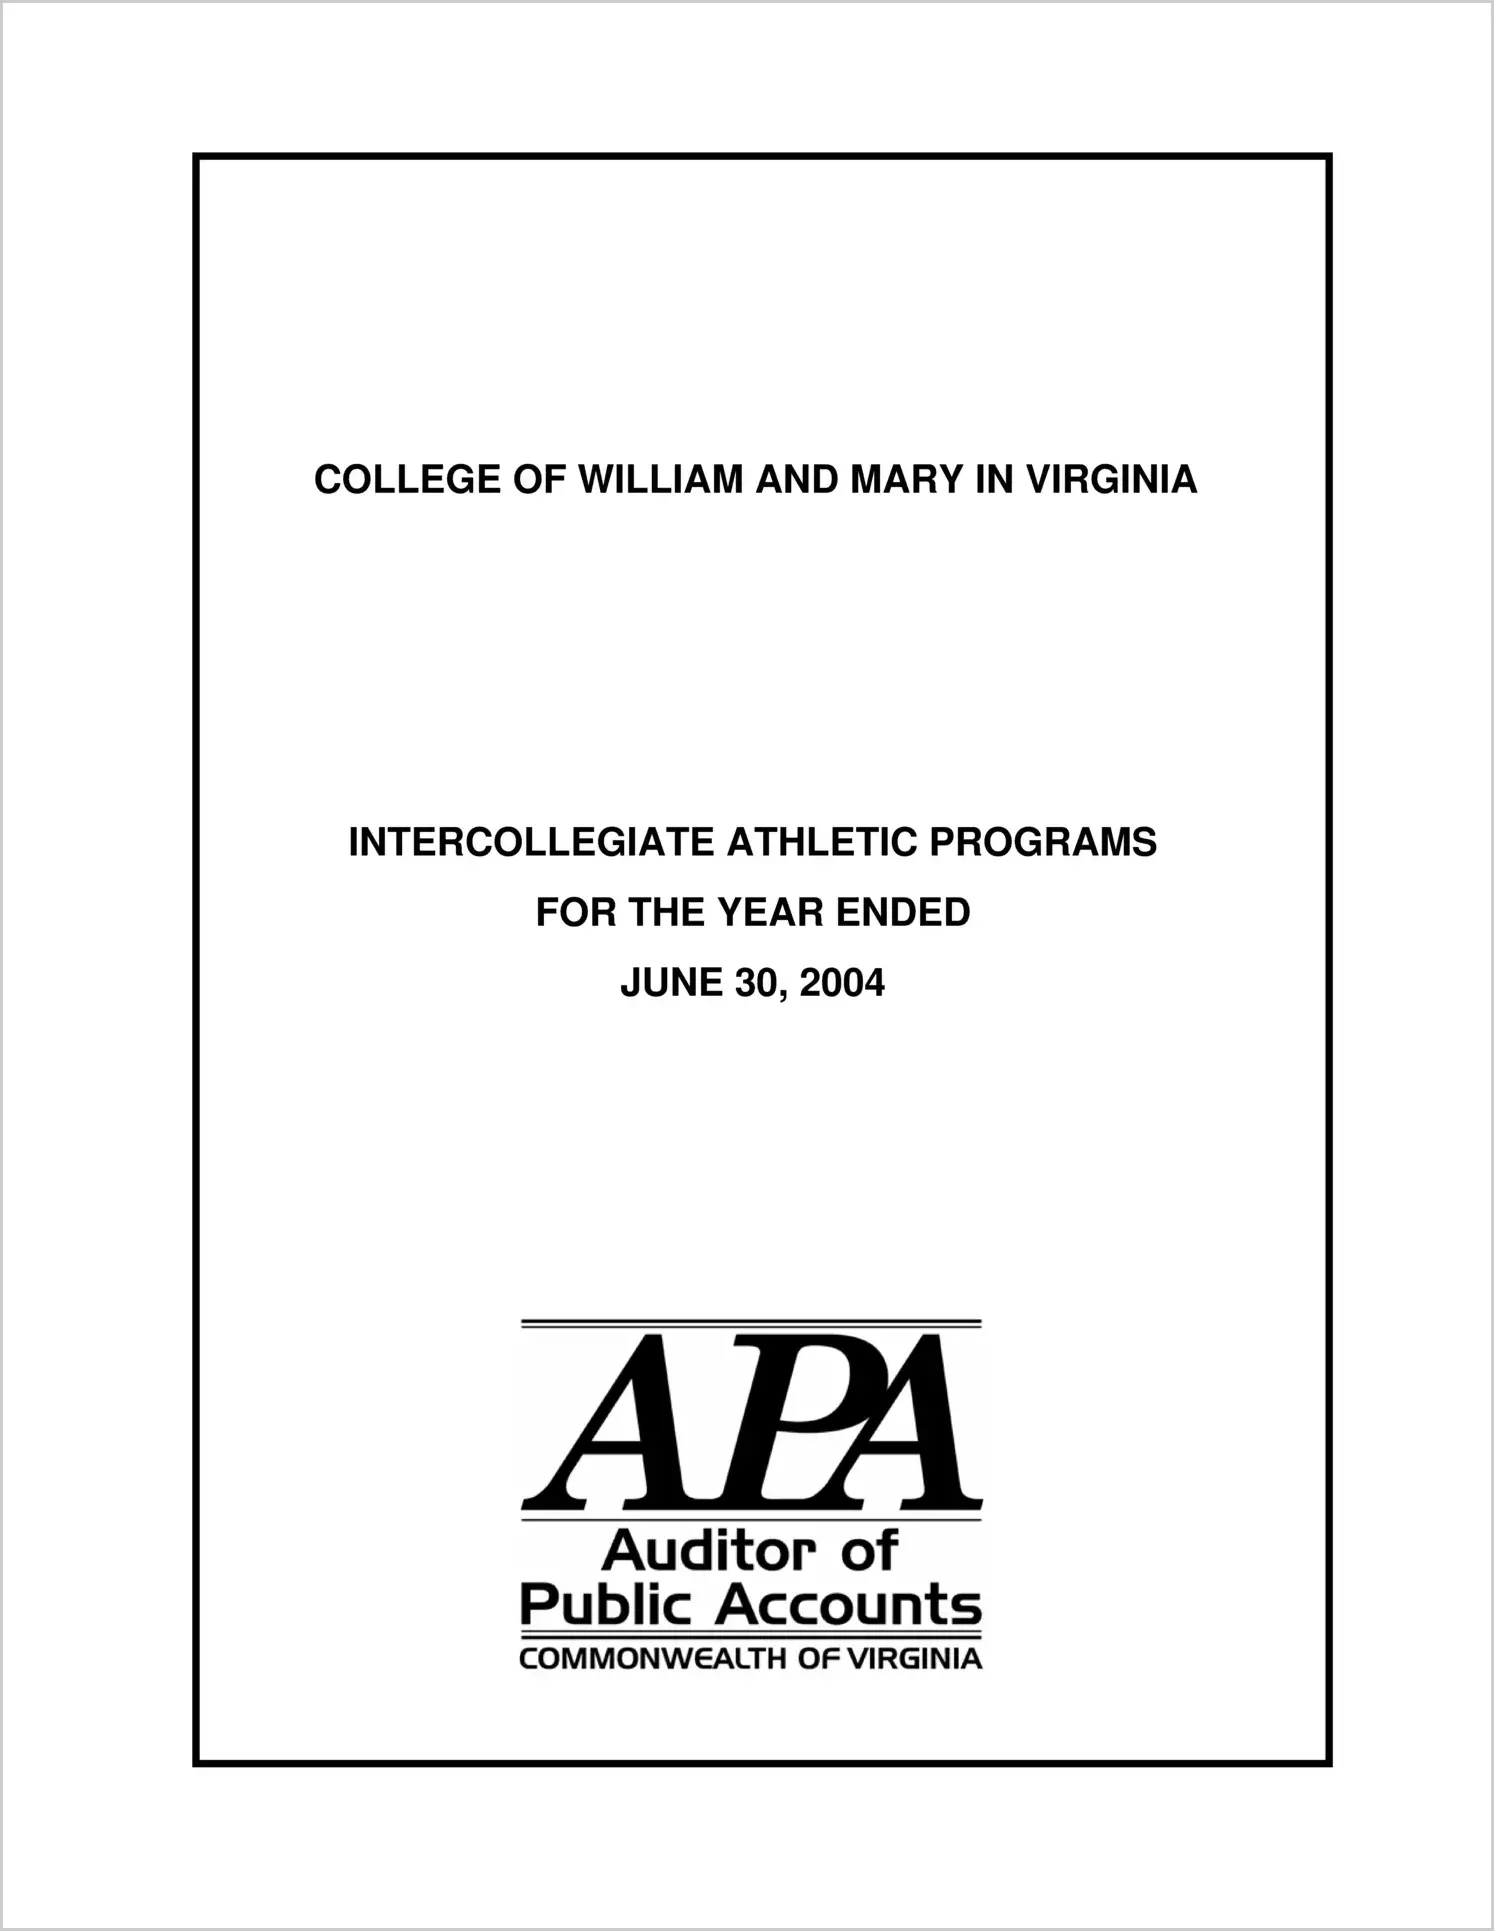 The College of William and Mary Intercollegiate Athletic Programs for the year ended June 30, 2004